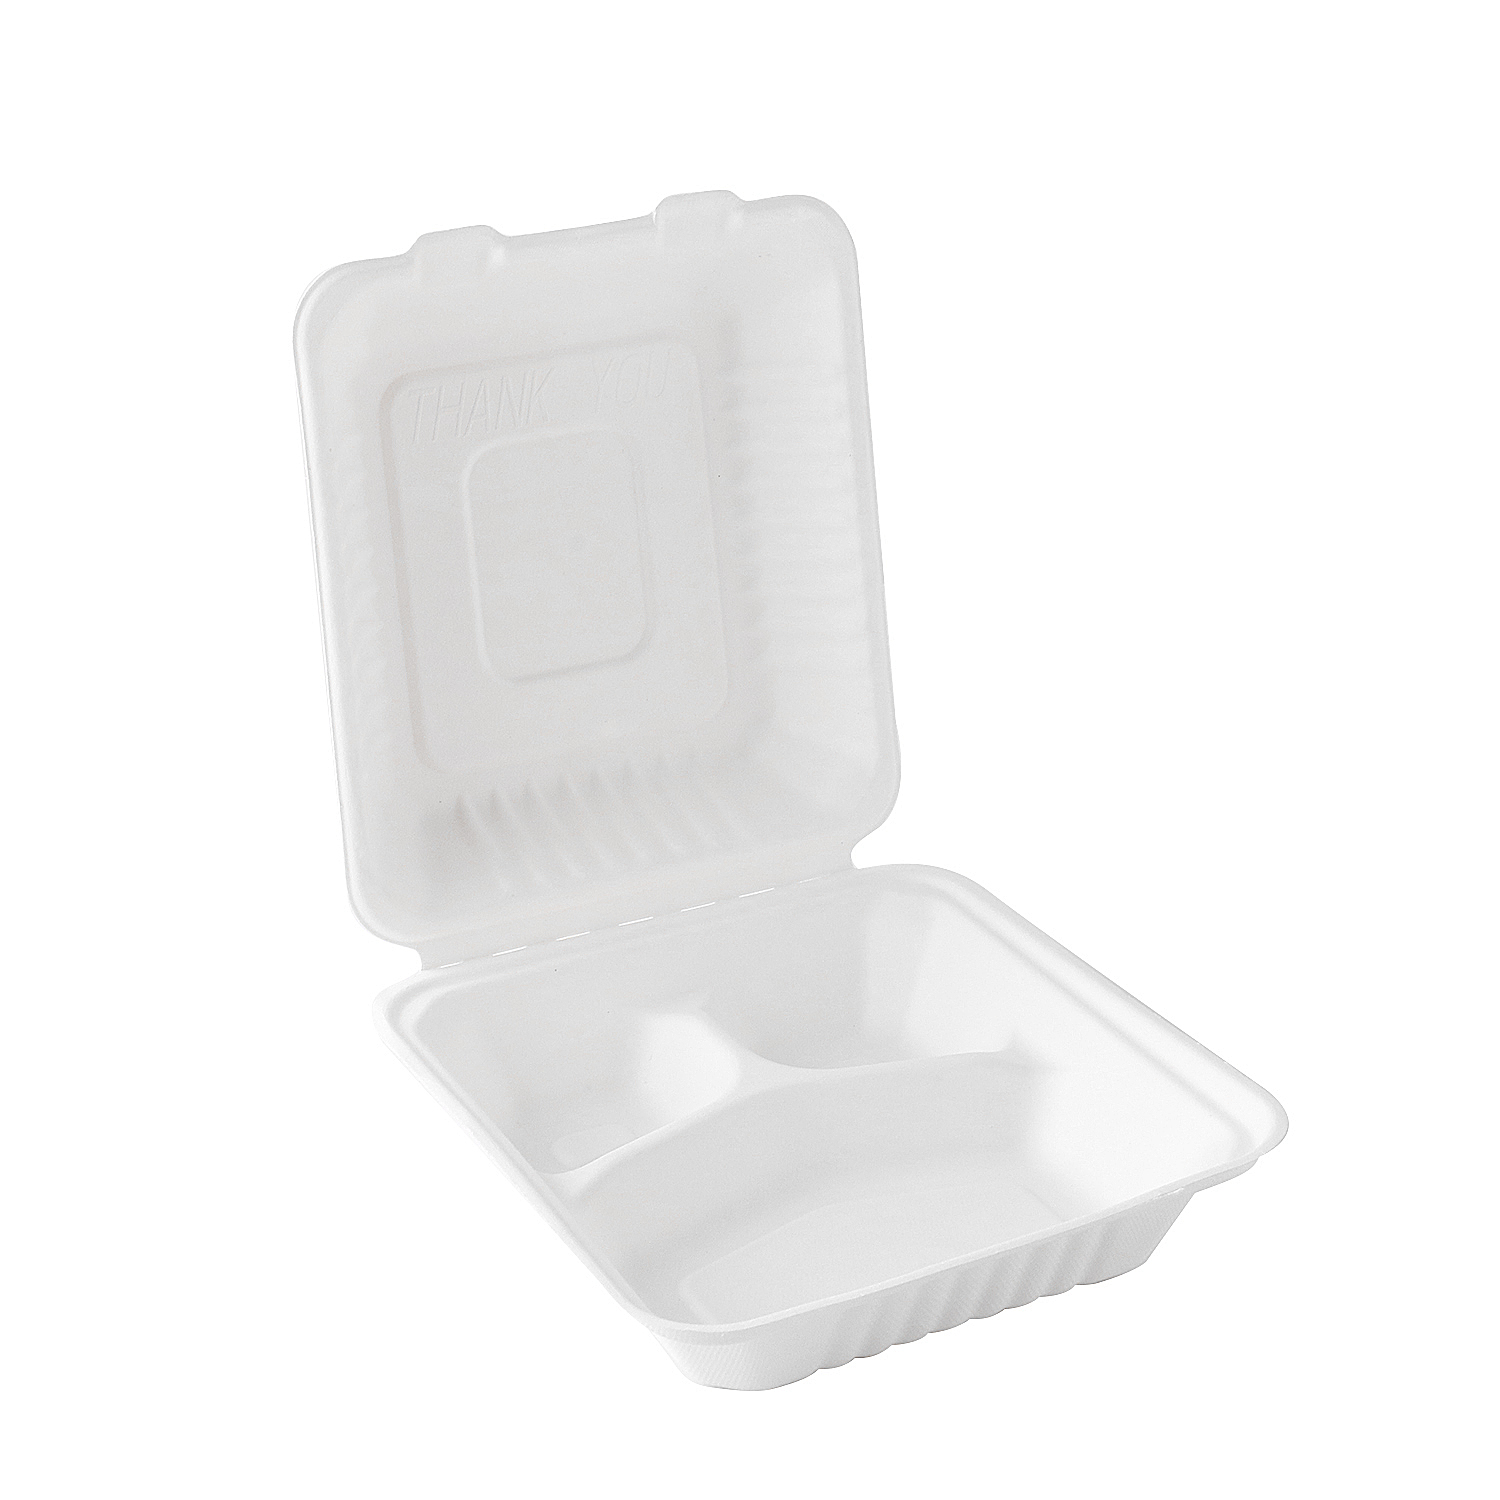 8"x8" x3'' Eco Food Packaging Bagasse 3 Compartment Clamshell Box